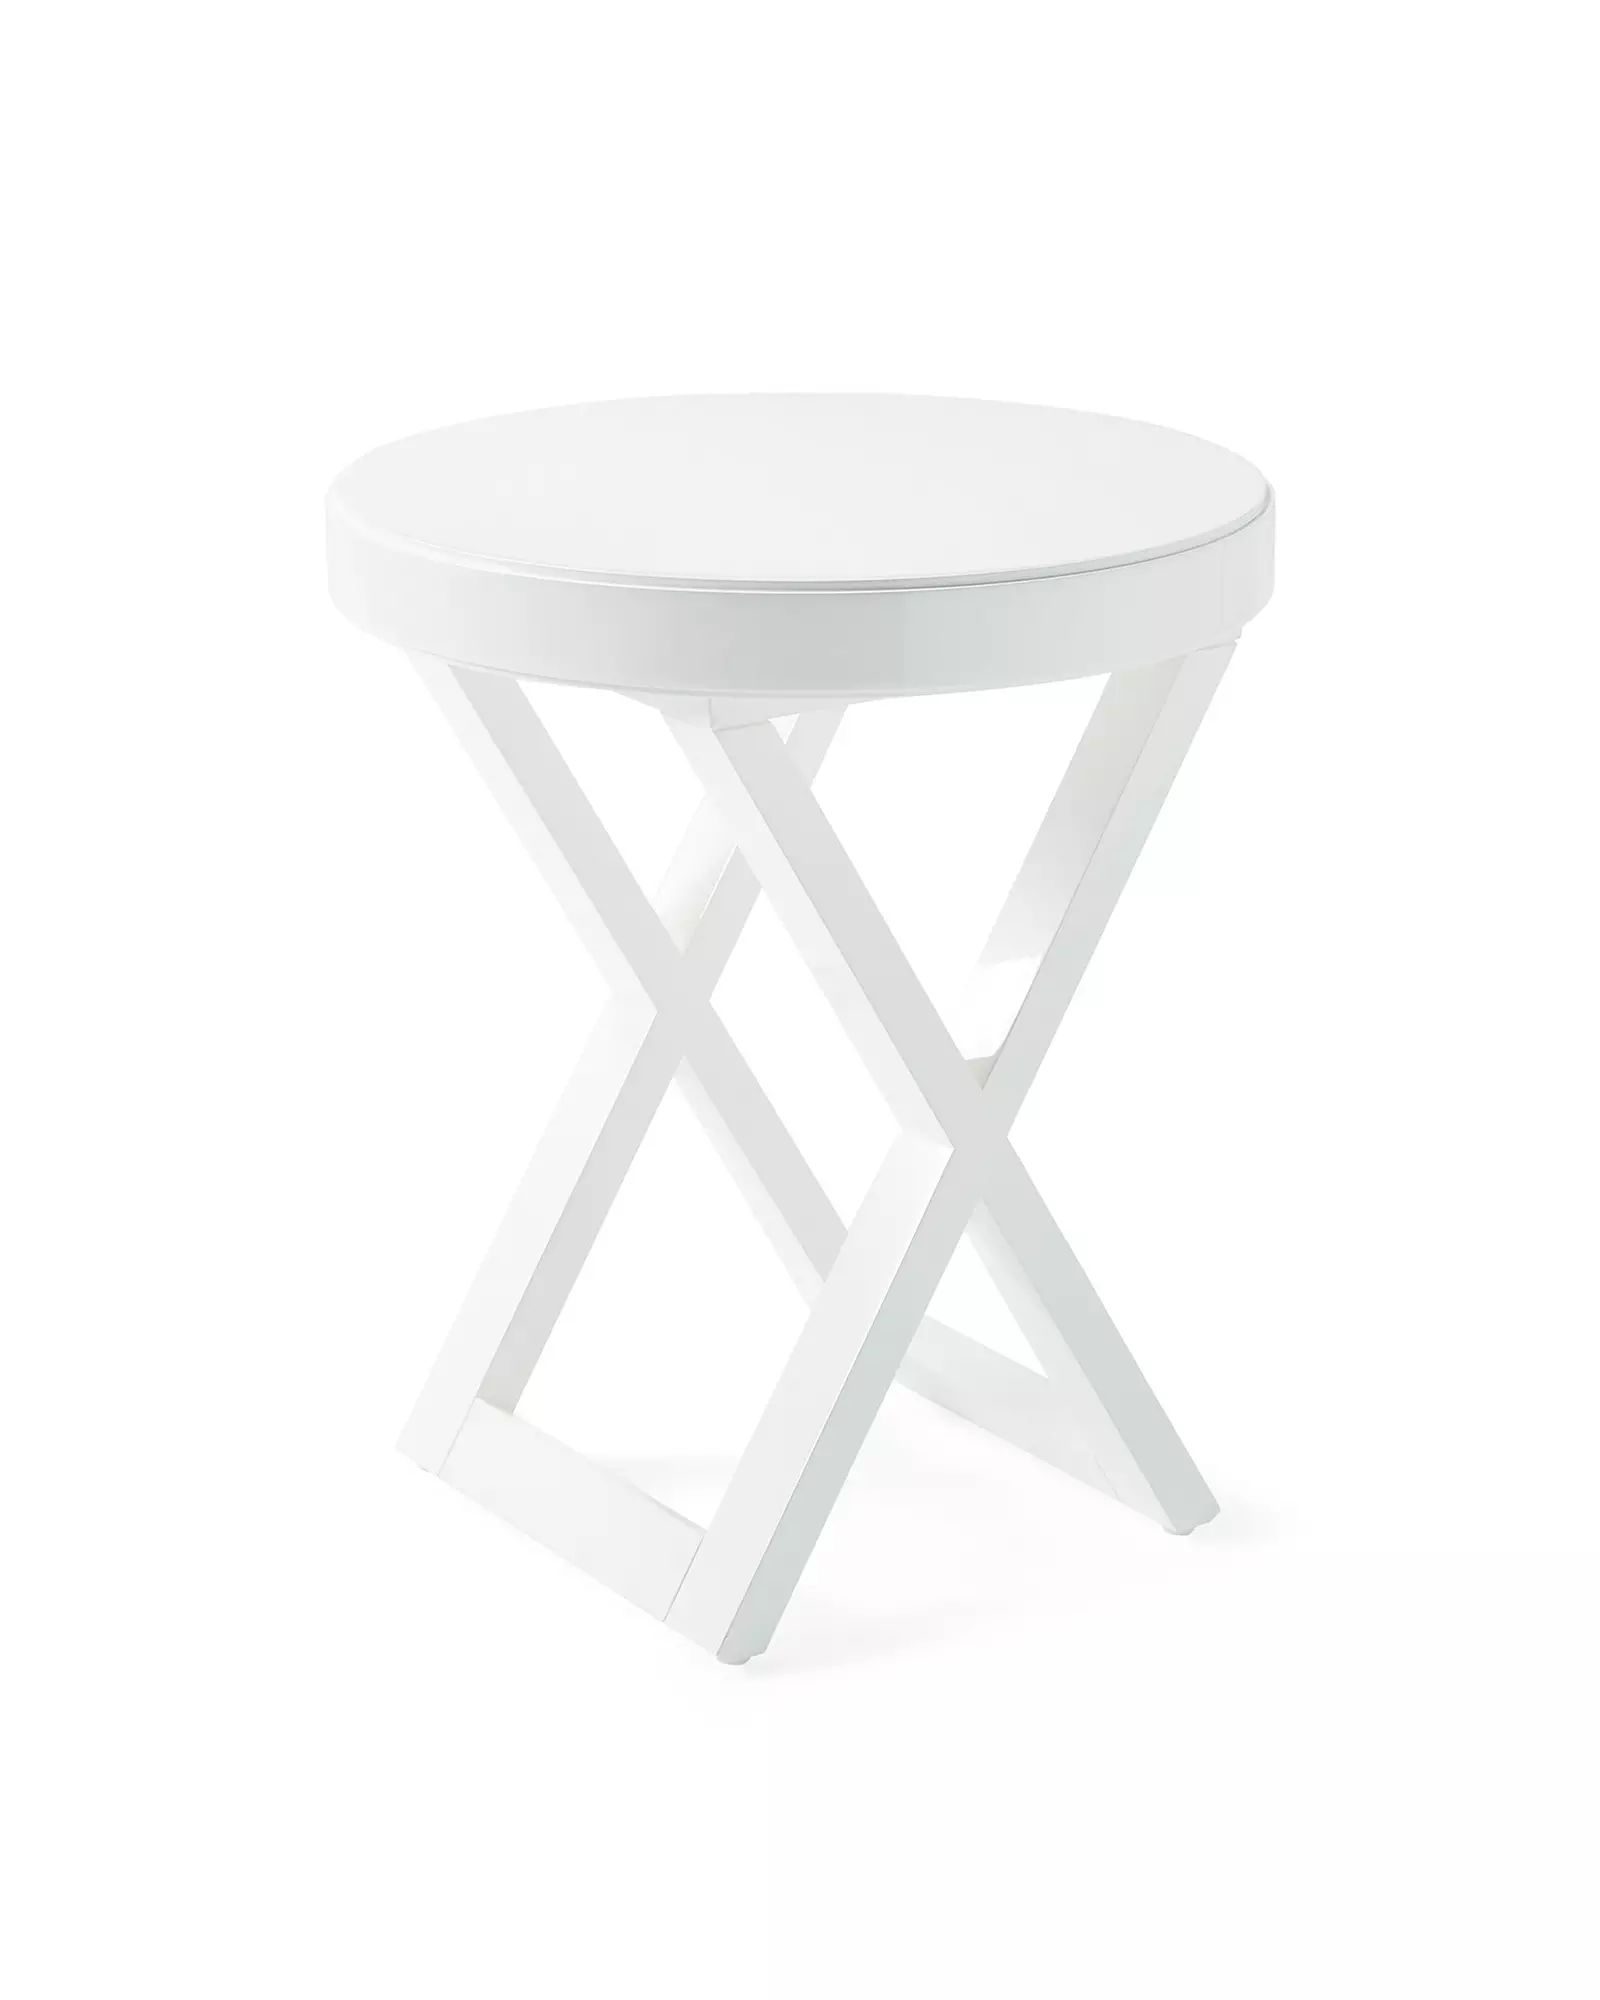 Atelier Round Side Table | Serena and Lily